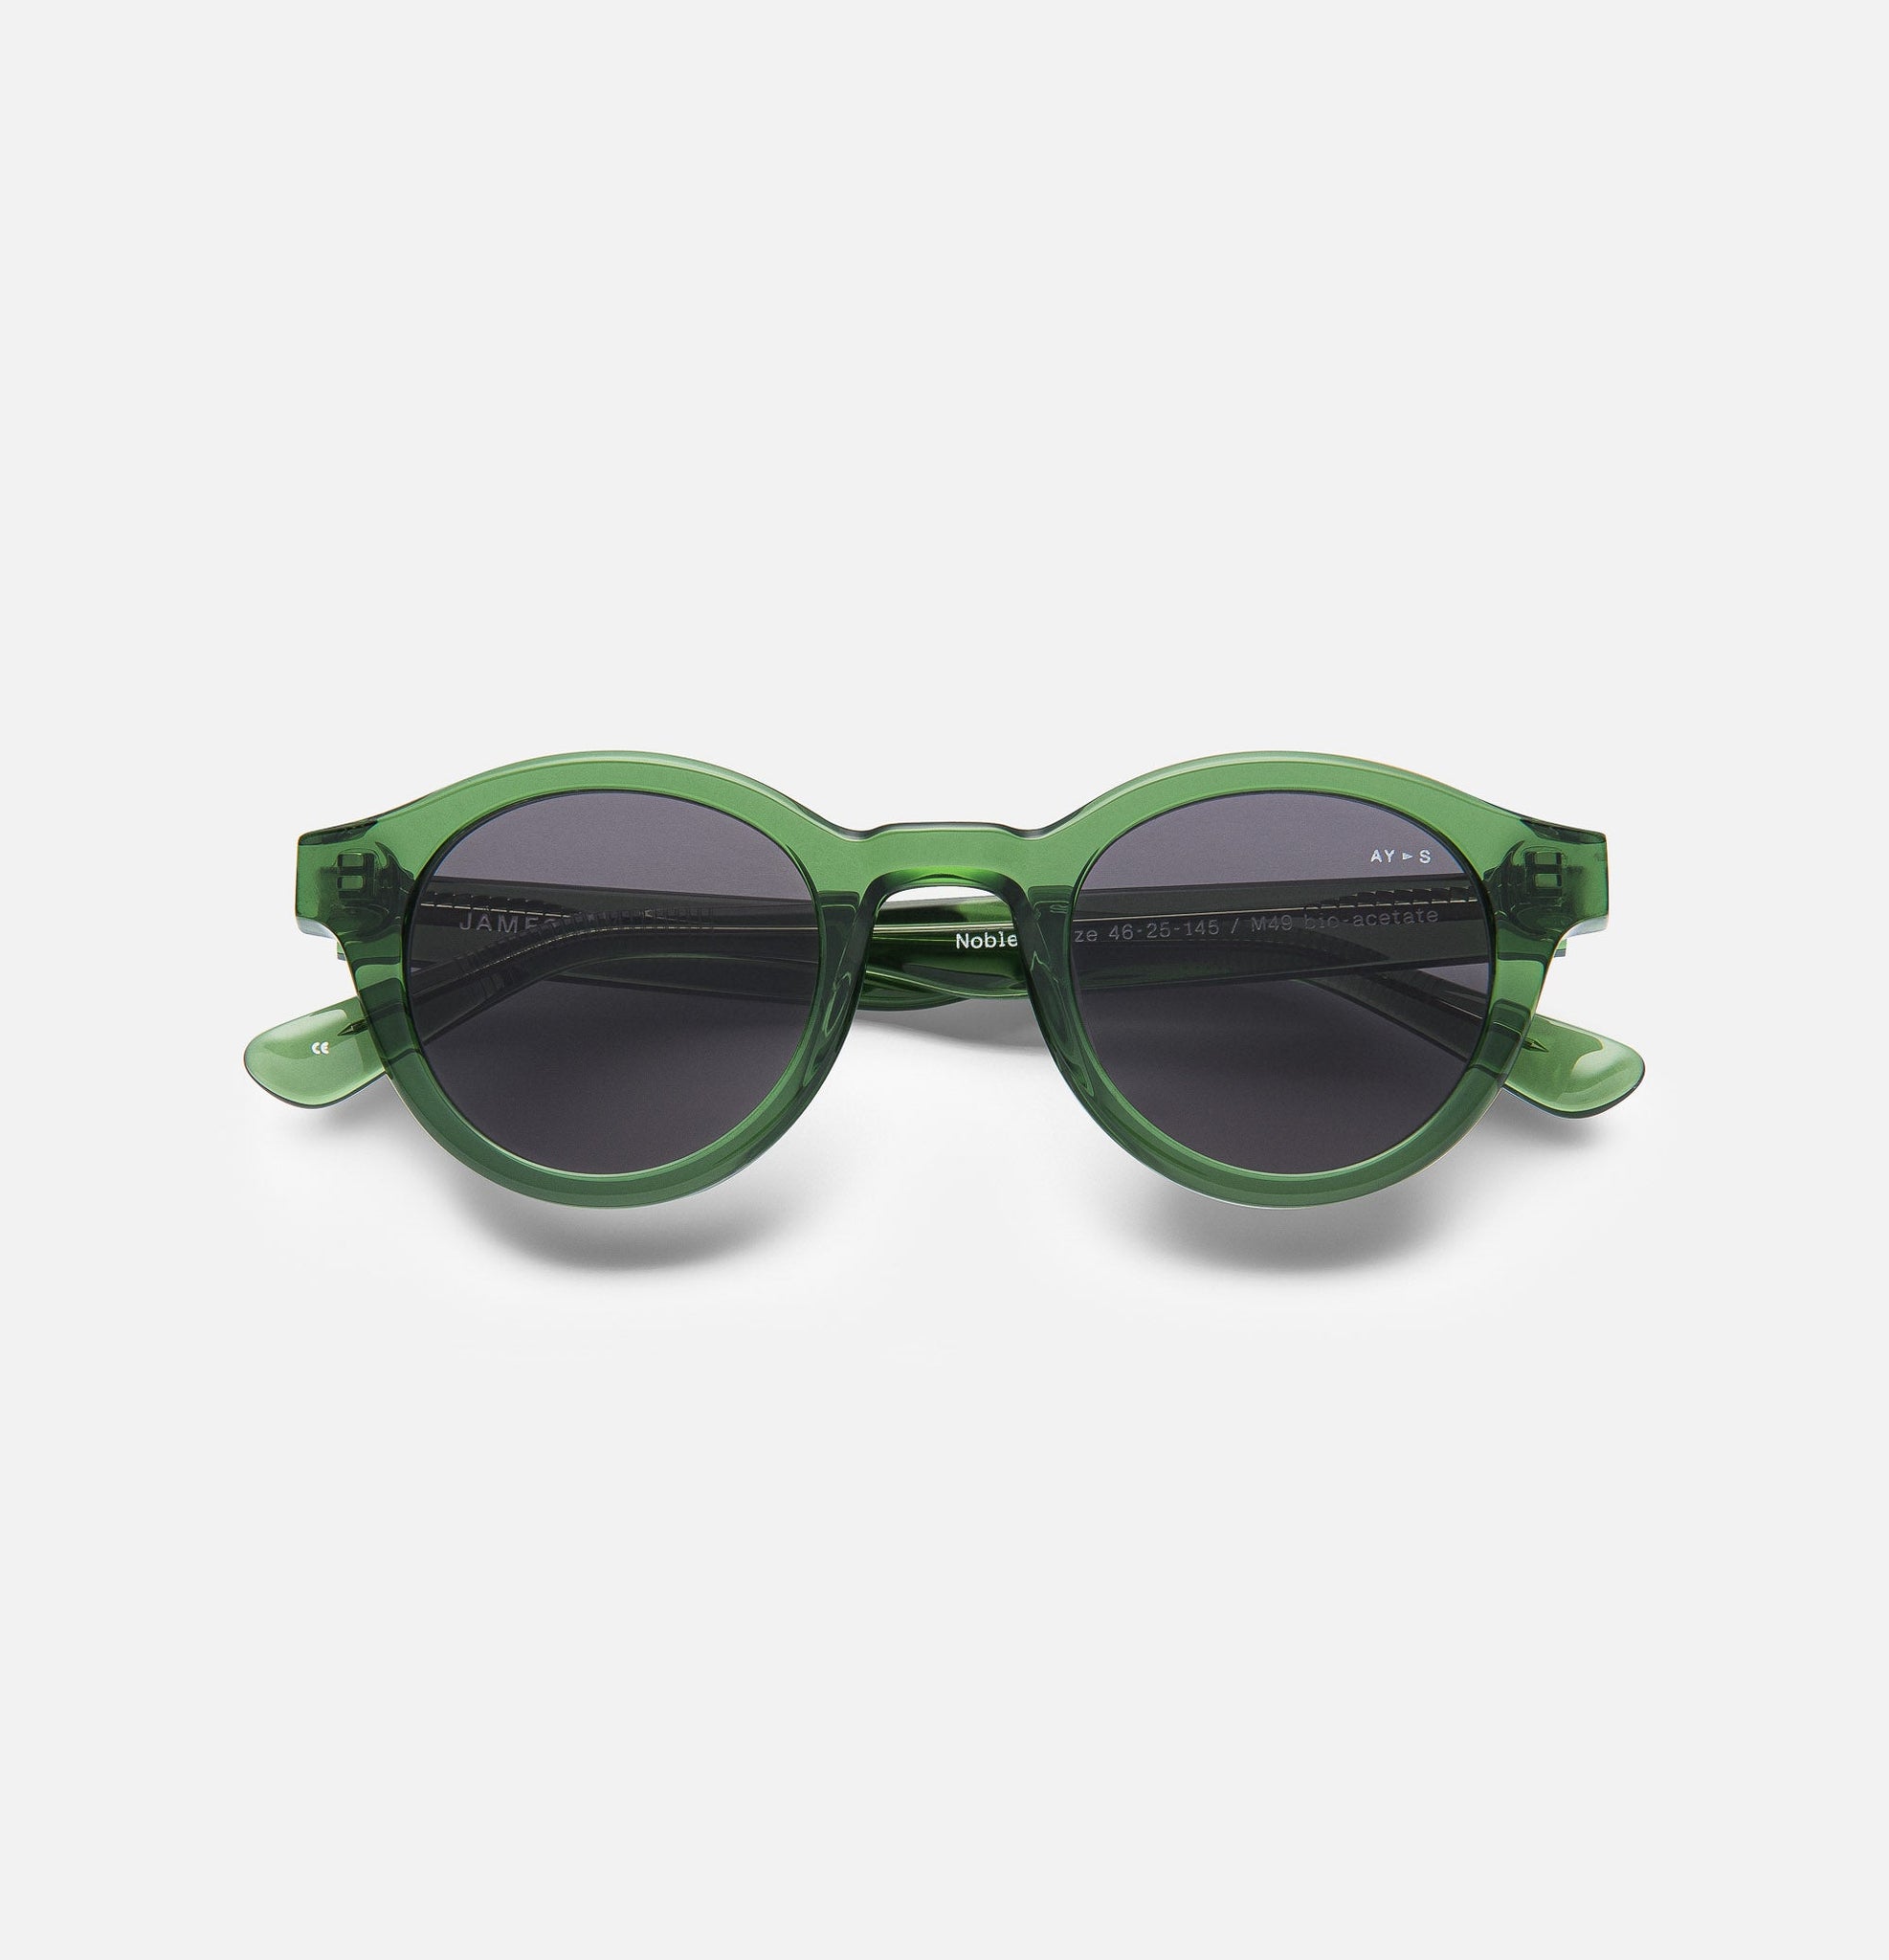 Noble - Transparent forest green - James Ay